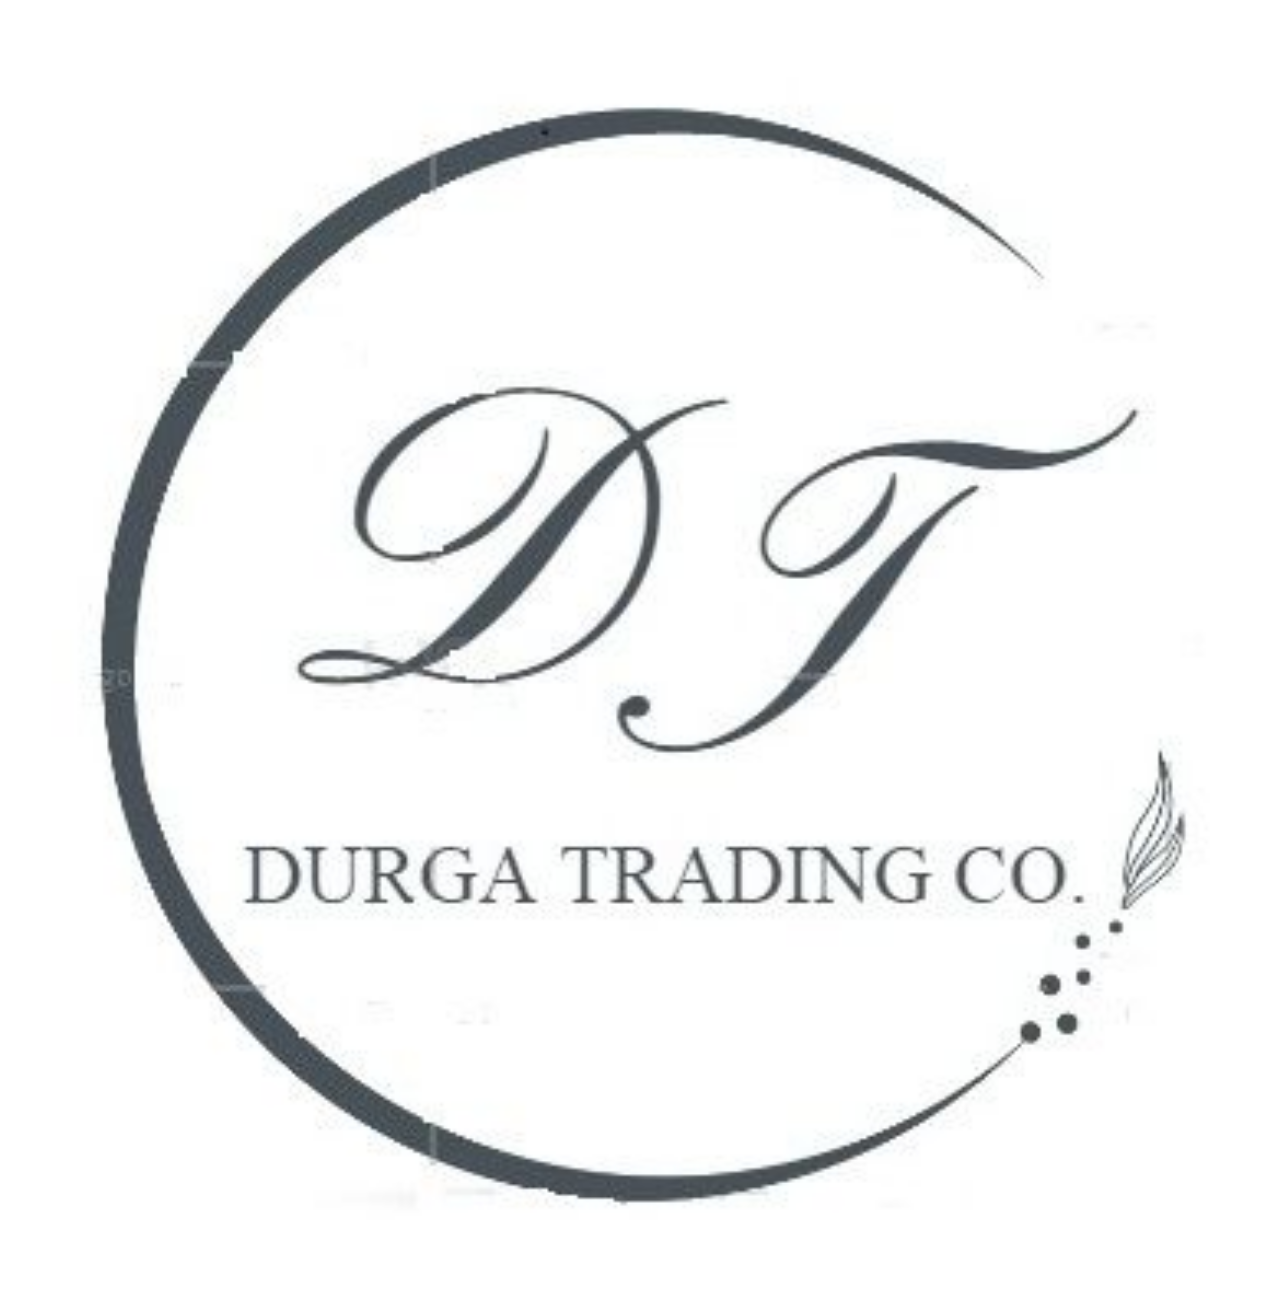 DURGA TRADING CO.'s web page